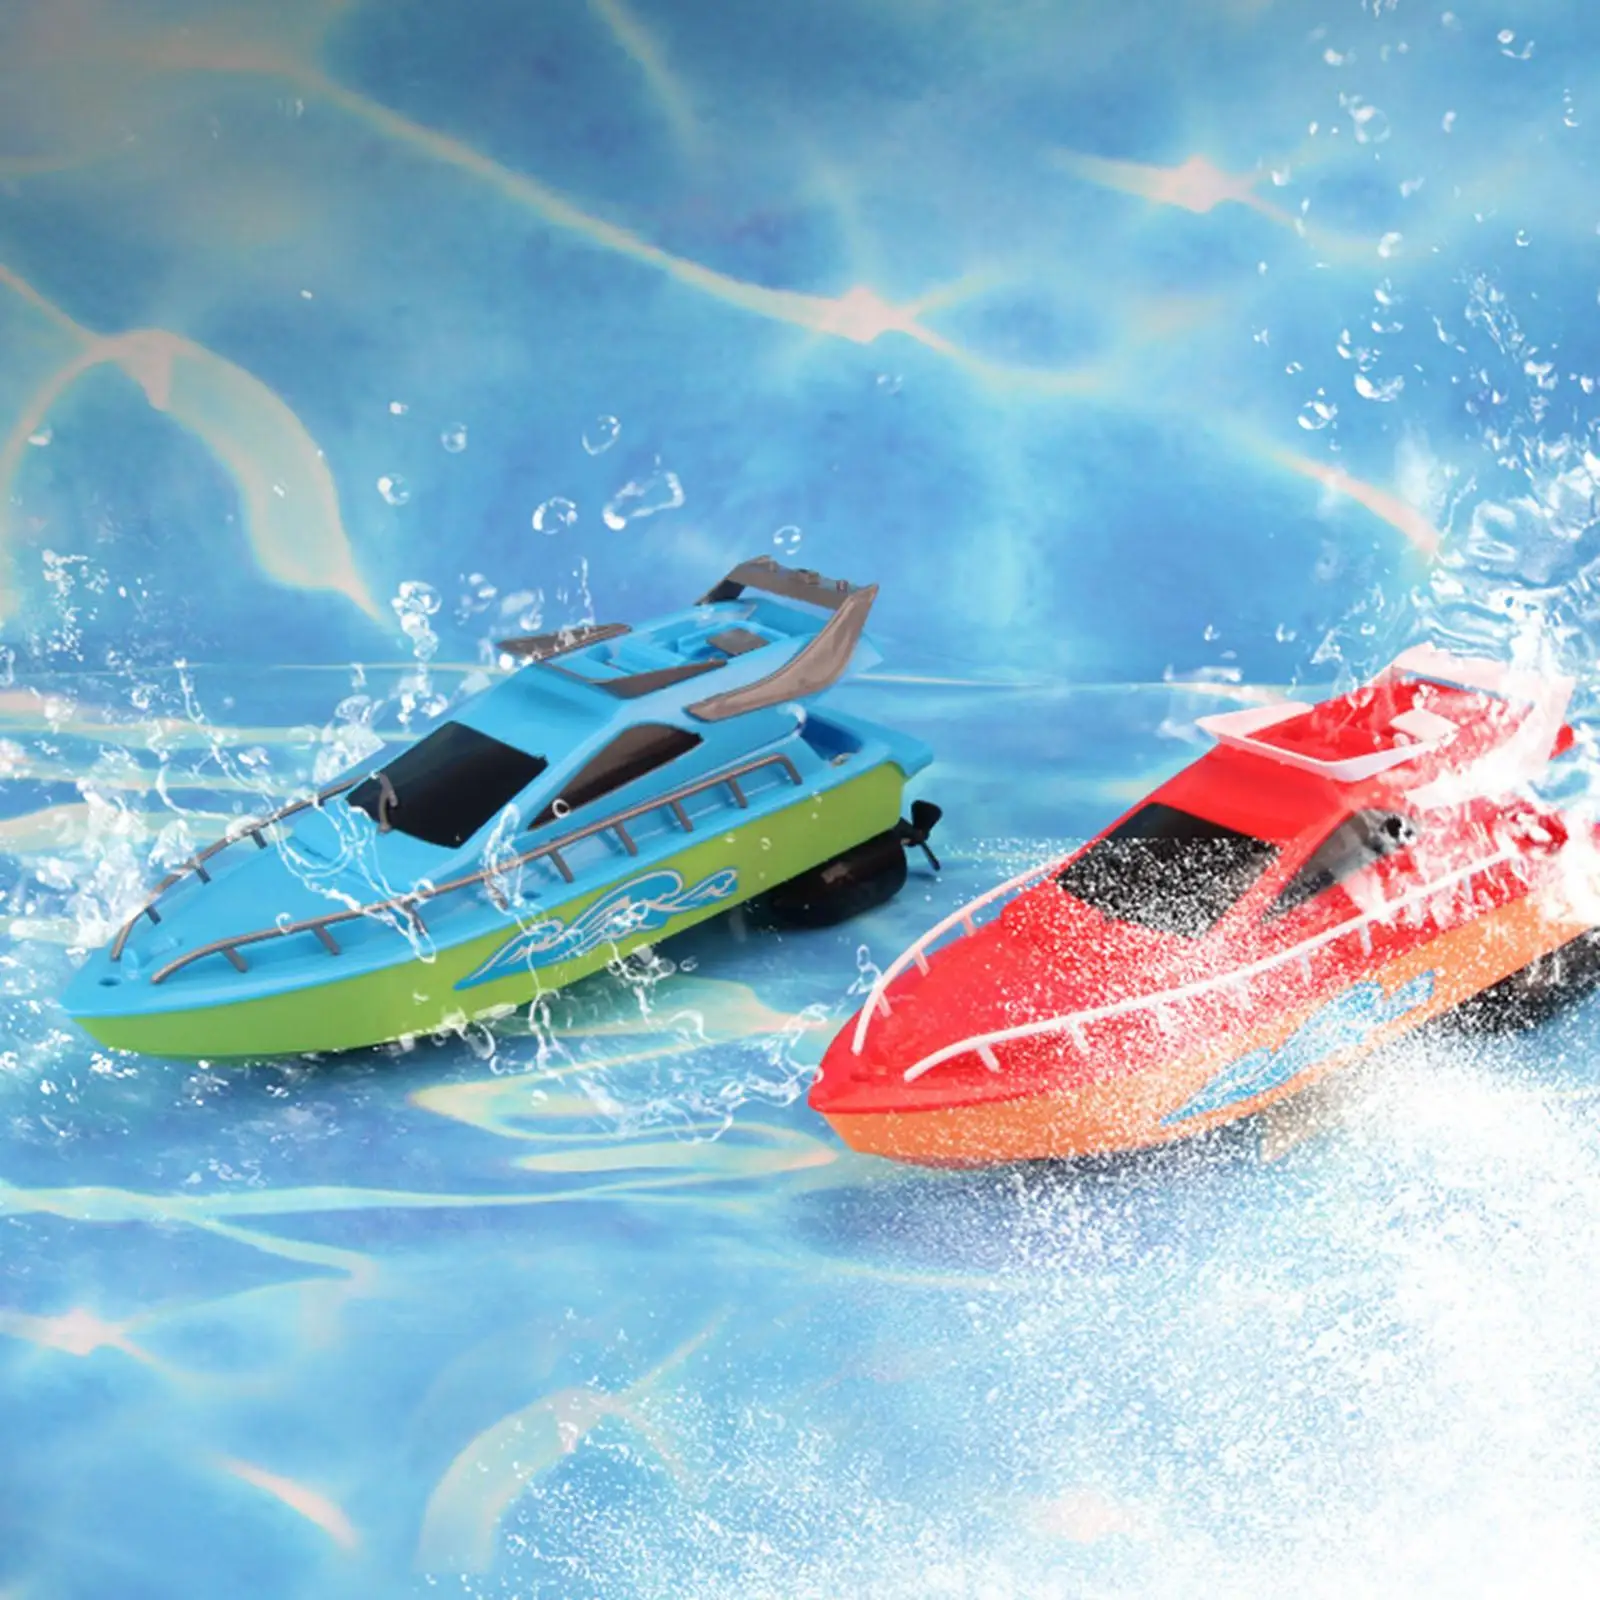 High Speed Remote Control Speedboat Pools Lakes Outdoor Toys for Boys Toy